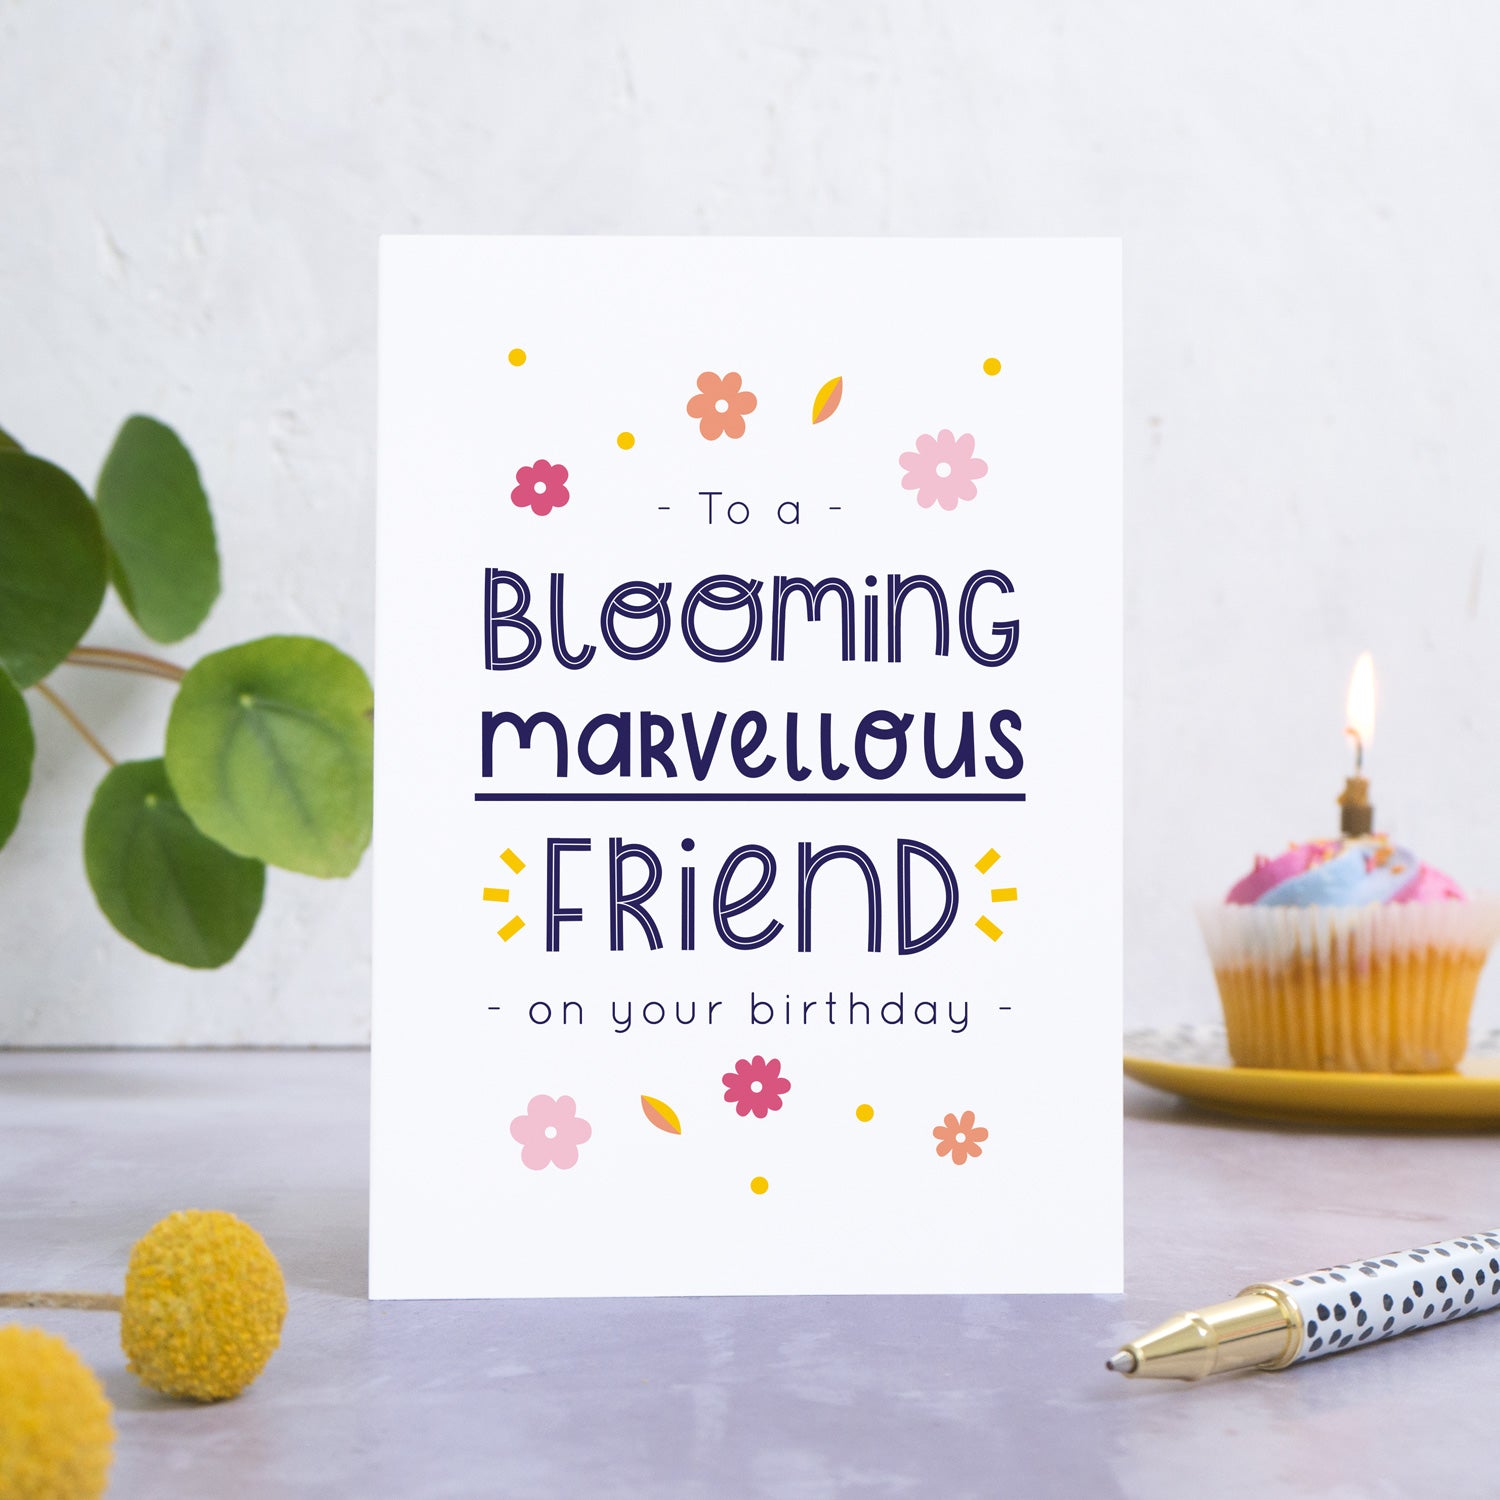 A blooming marvellous friend birthday card photographed standing in front of a white background. In the background is a plant and a birthday cupcake and with a candle. In the foreground are two yellow flowers and a spotty pen.